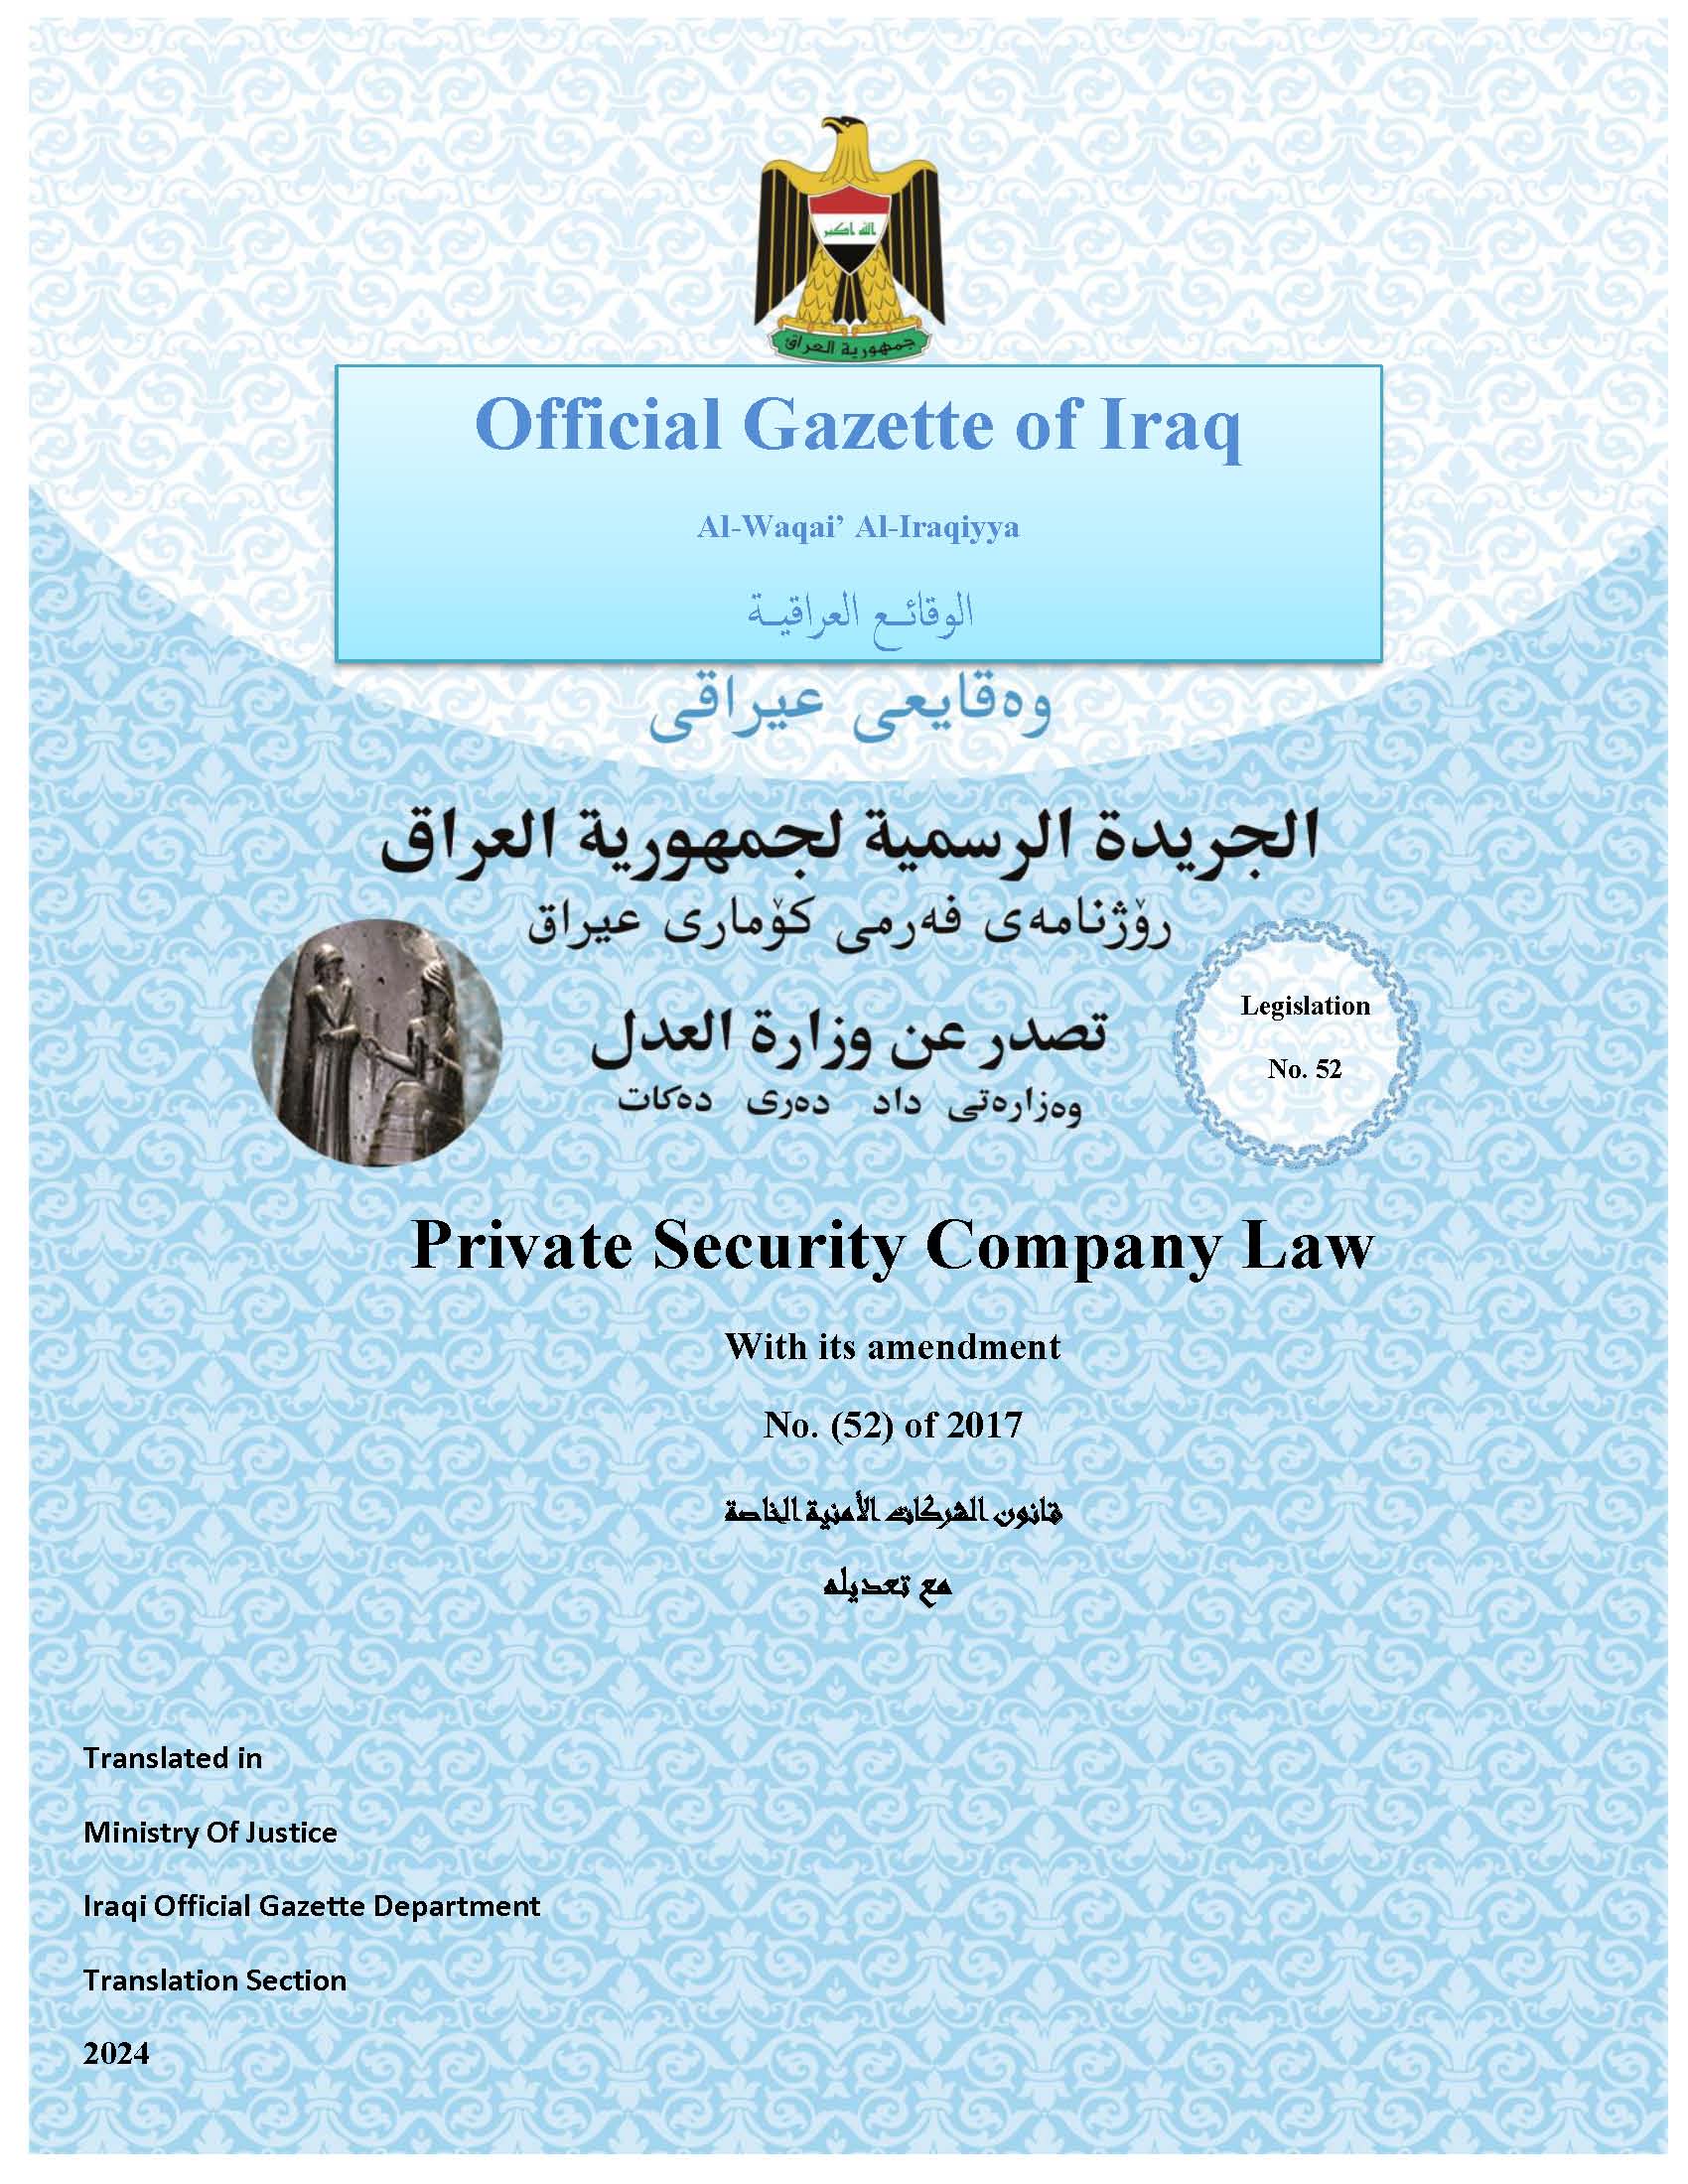 Private Security Company Law With its amendment No.(52) of 2017 